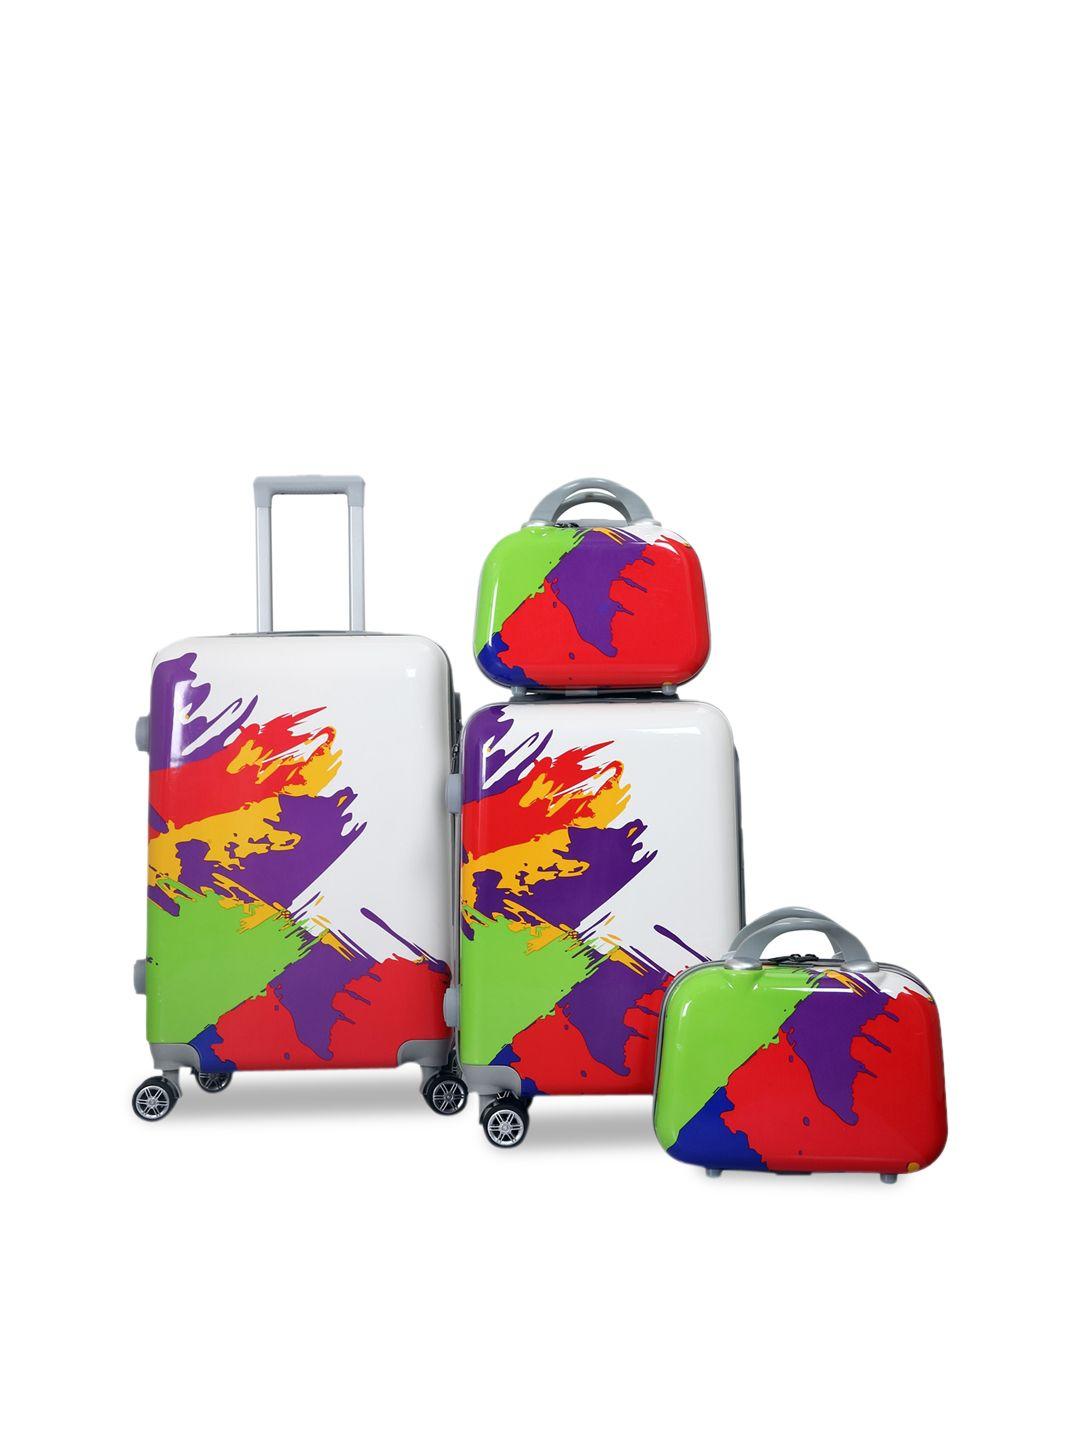 Polo Class Multi-Coloured 4-Pieces Printed Hard Case Luggage Trolley & Vanity Bag Set